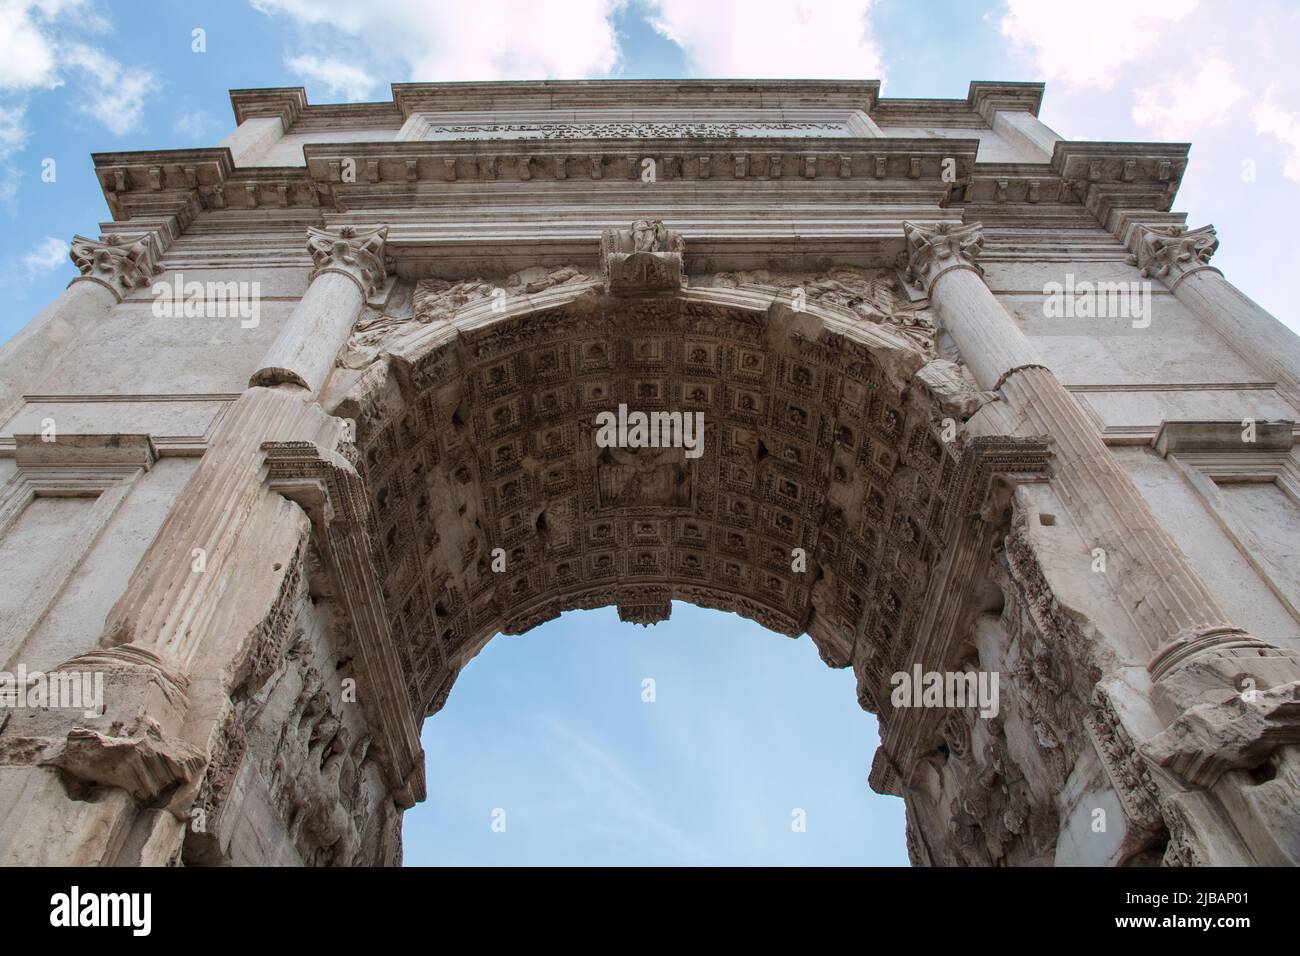 SEP 29, 2019 - Rome, Italy: the arch of Titus on the Via Sacra, close to the Forum Romanum in Rome. Built by emperor Domitian in the 1st-century AD. Stock Photo